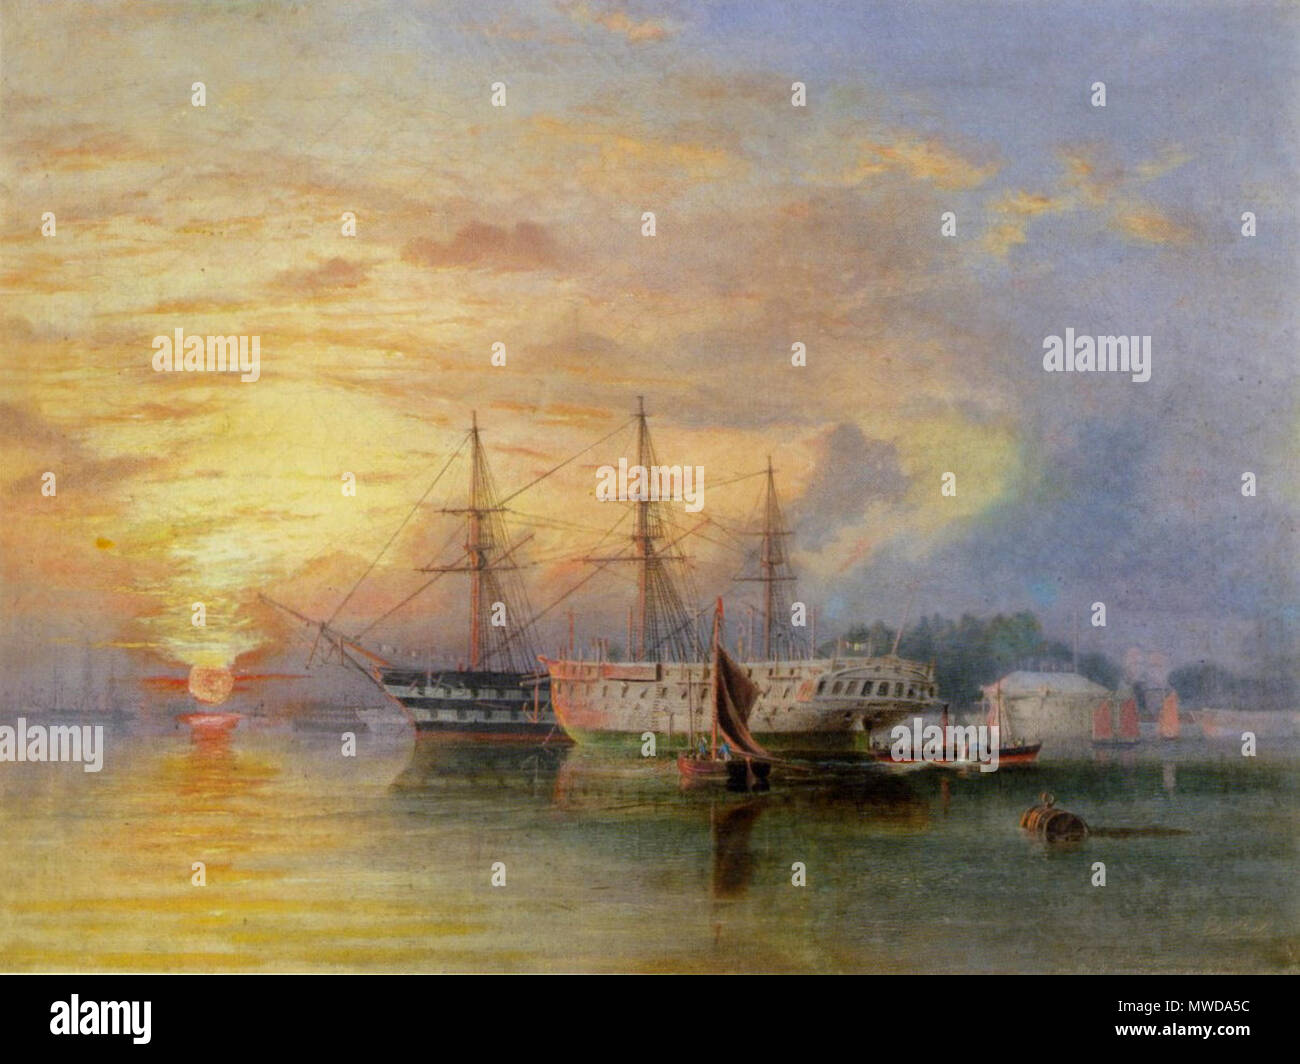 English The St George And The Arethusa On The Hamoaze Near Bull Point Edward Snell 10 10 280 Hms St Georges And Arethusa Edward Snell Stock Photo Alamy